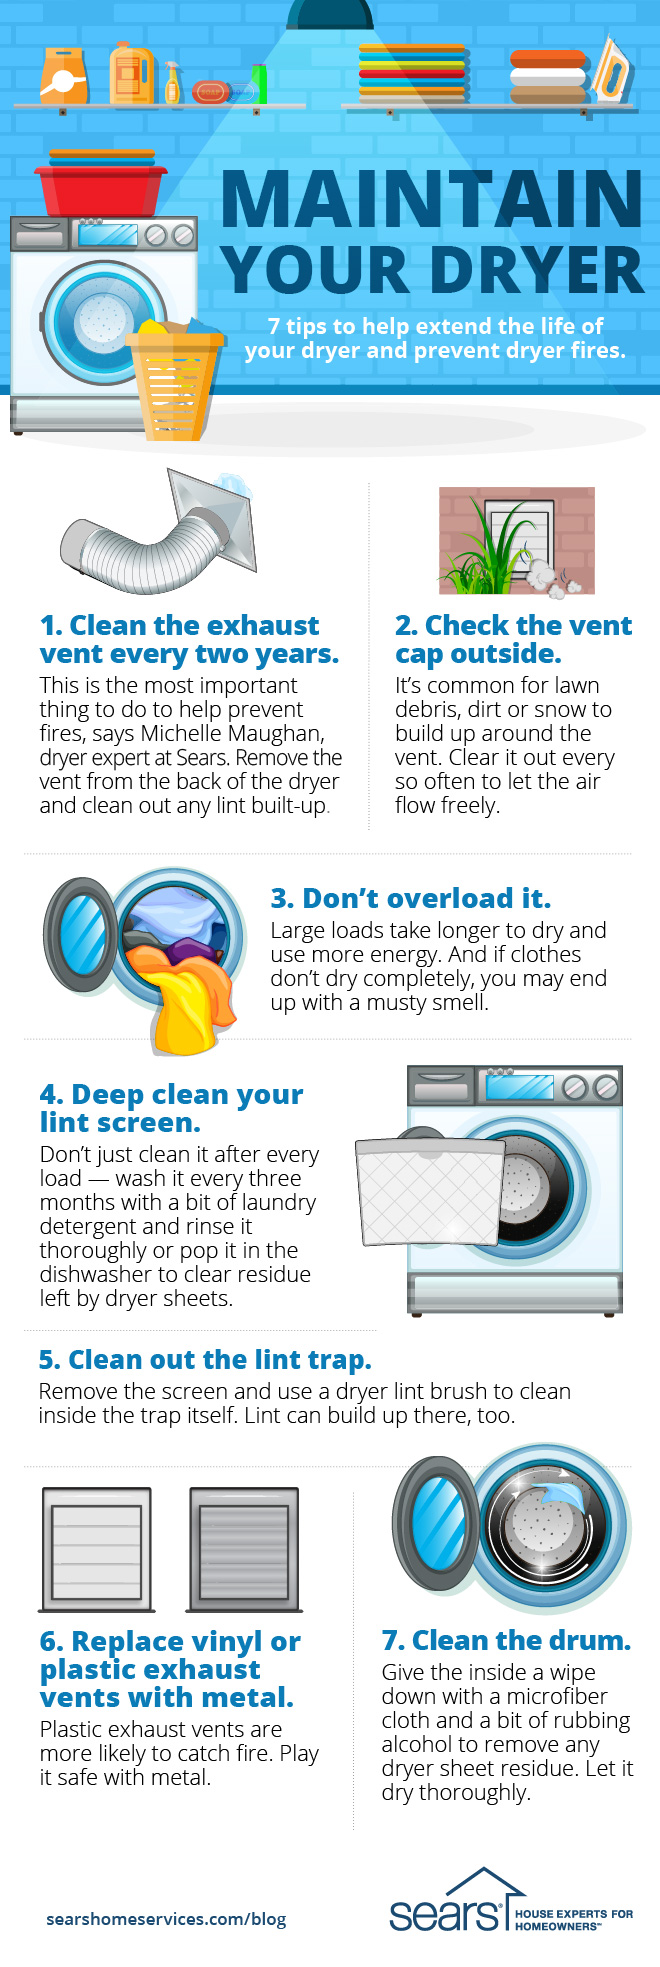 How To Use The Dryer 7 Dryer Maintenance Tips You Need To Know